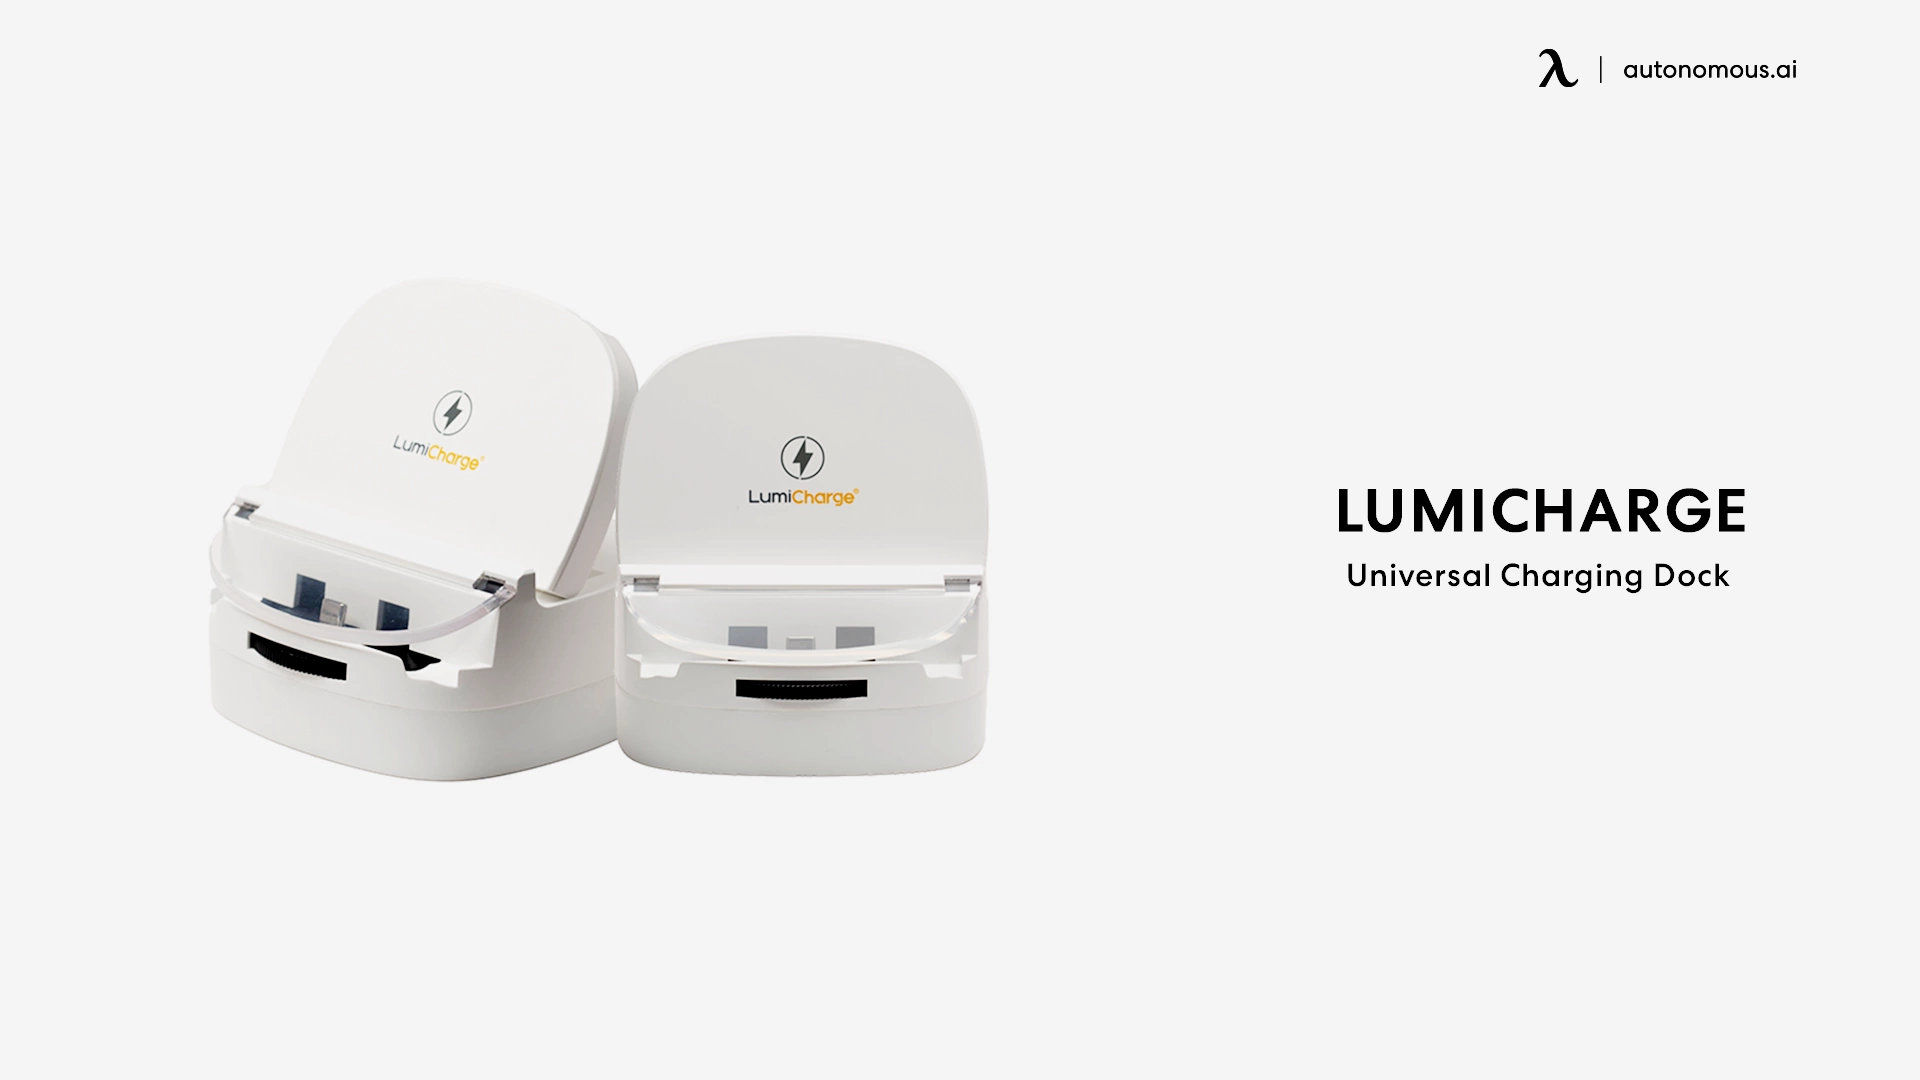 Universal Charging Dock by Lumicharge